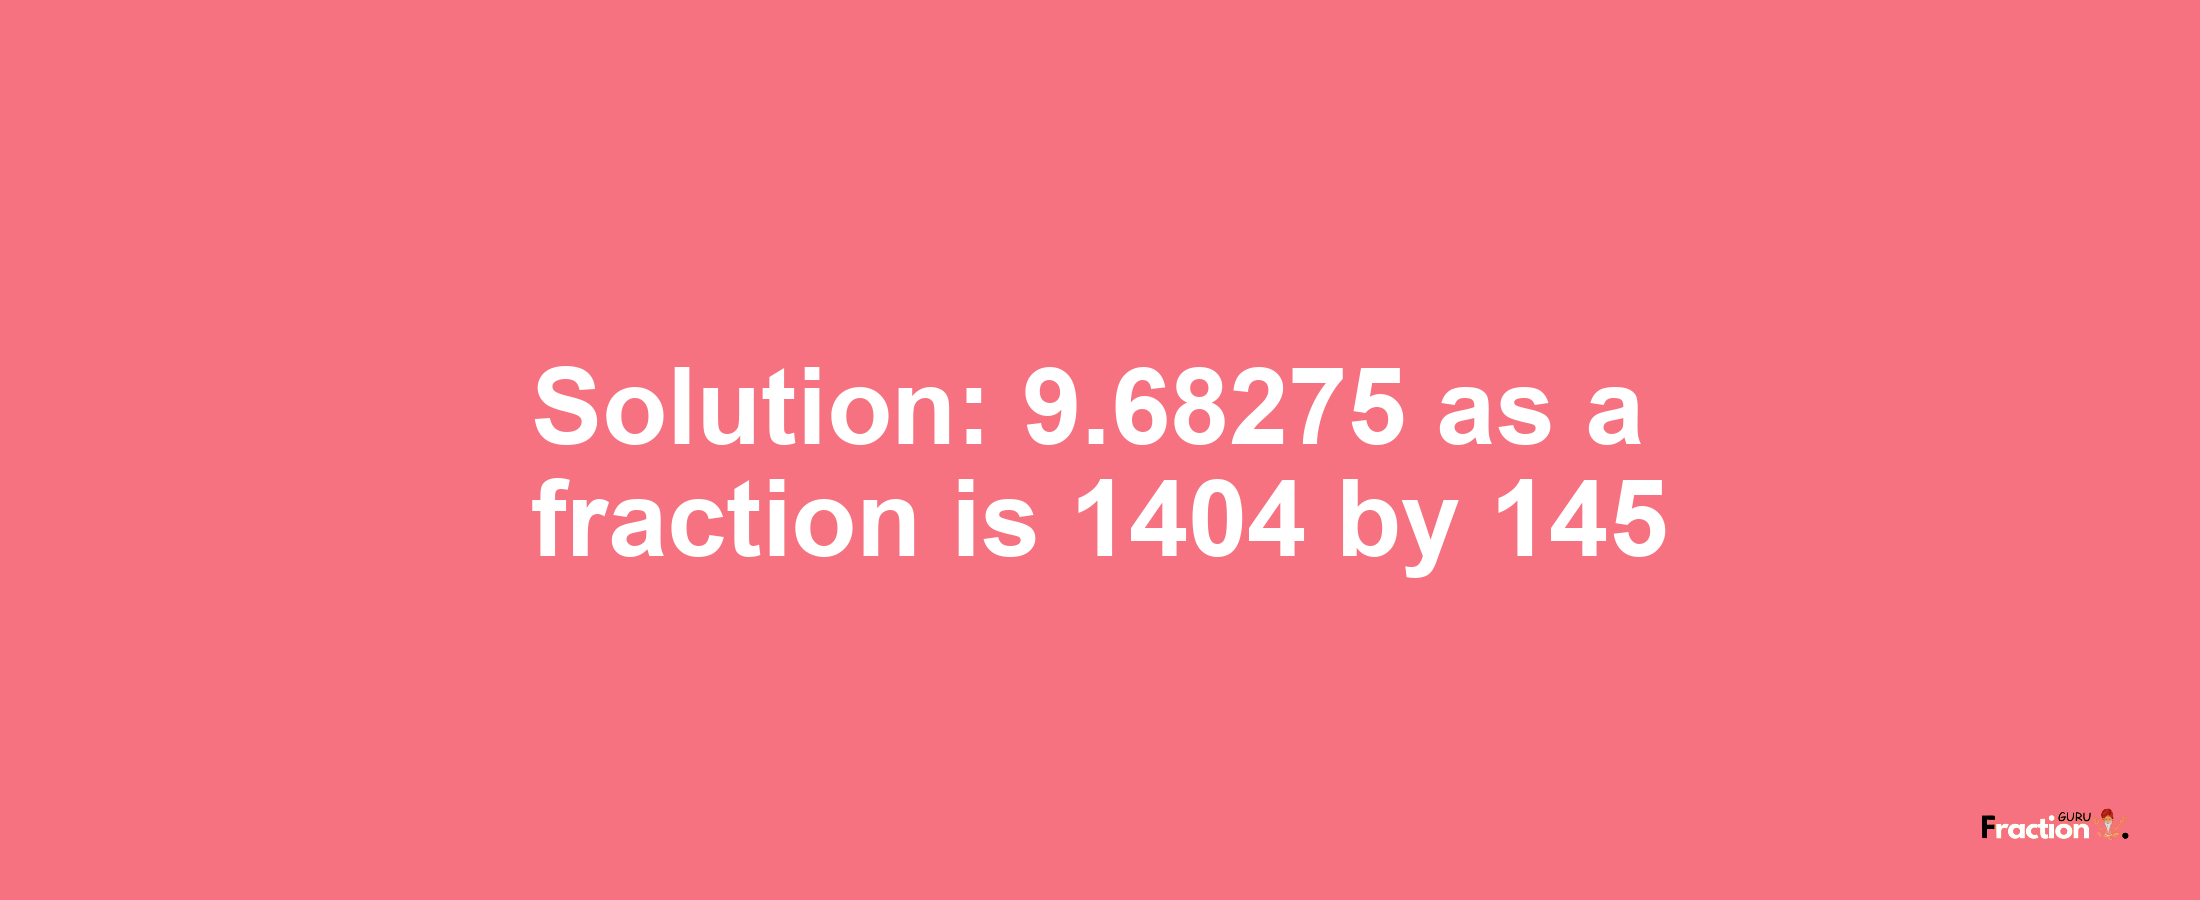 Solution:9.68275 as a fraction is 1404/145